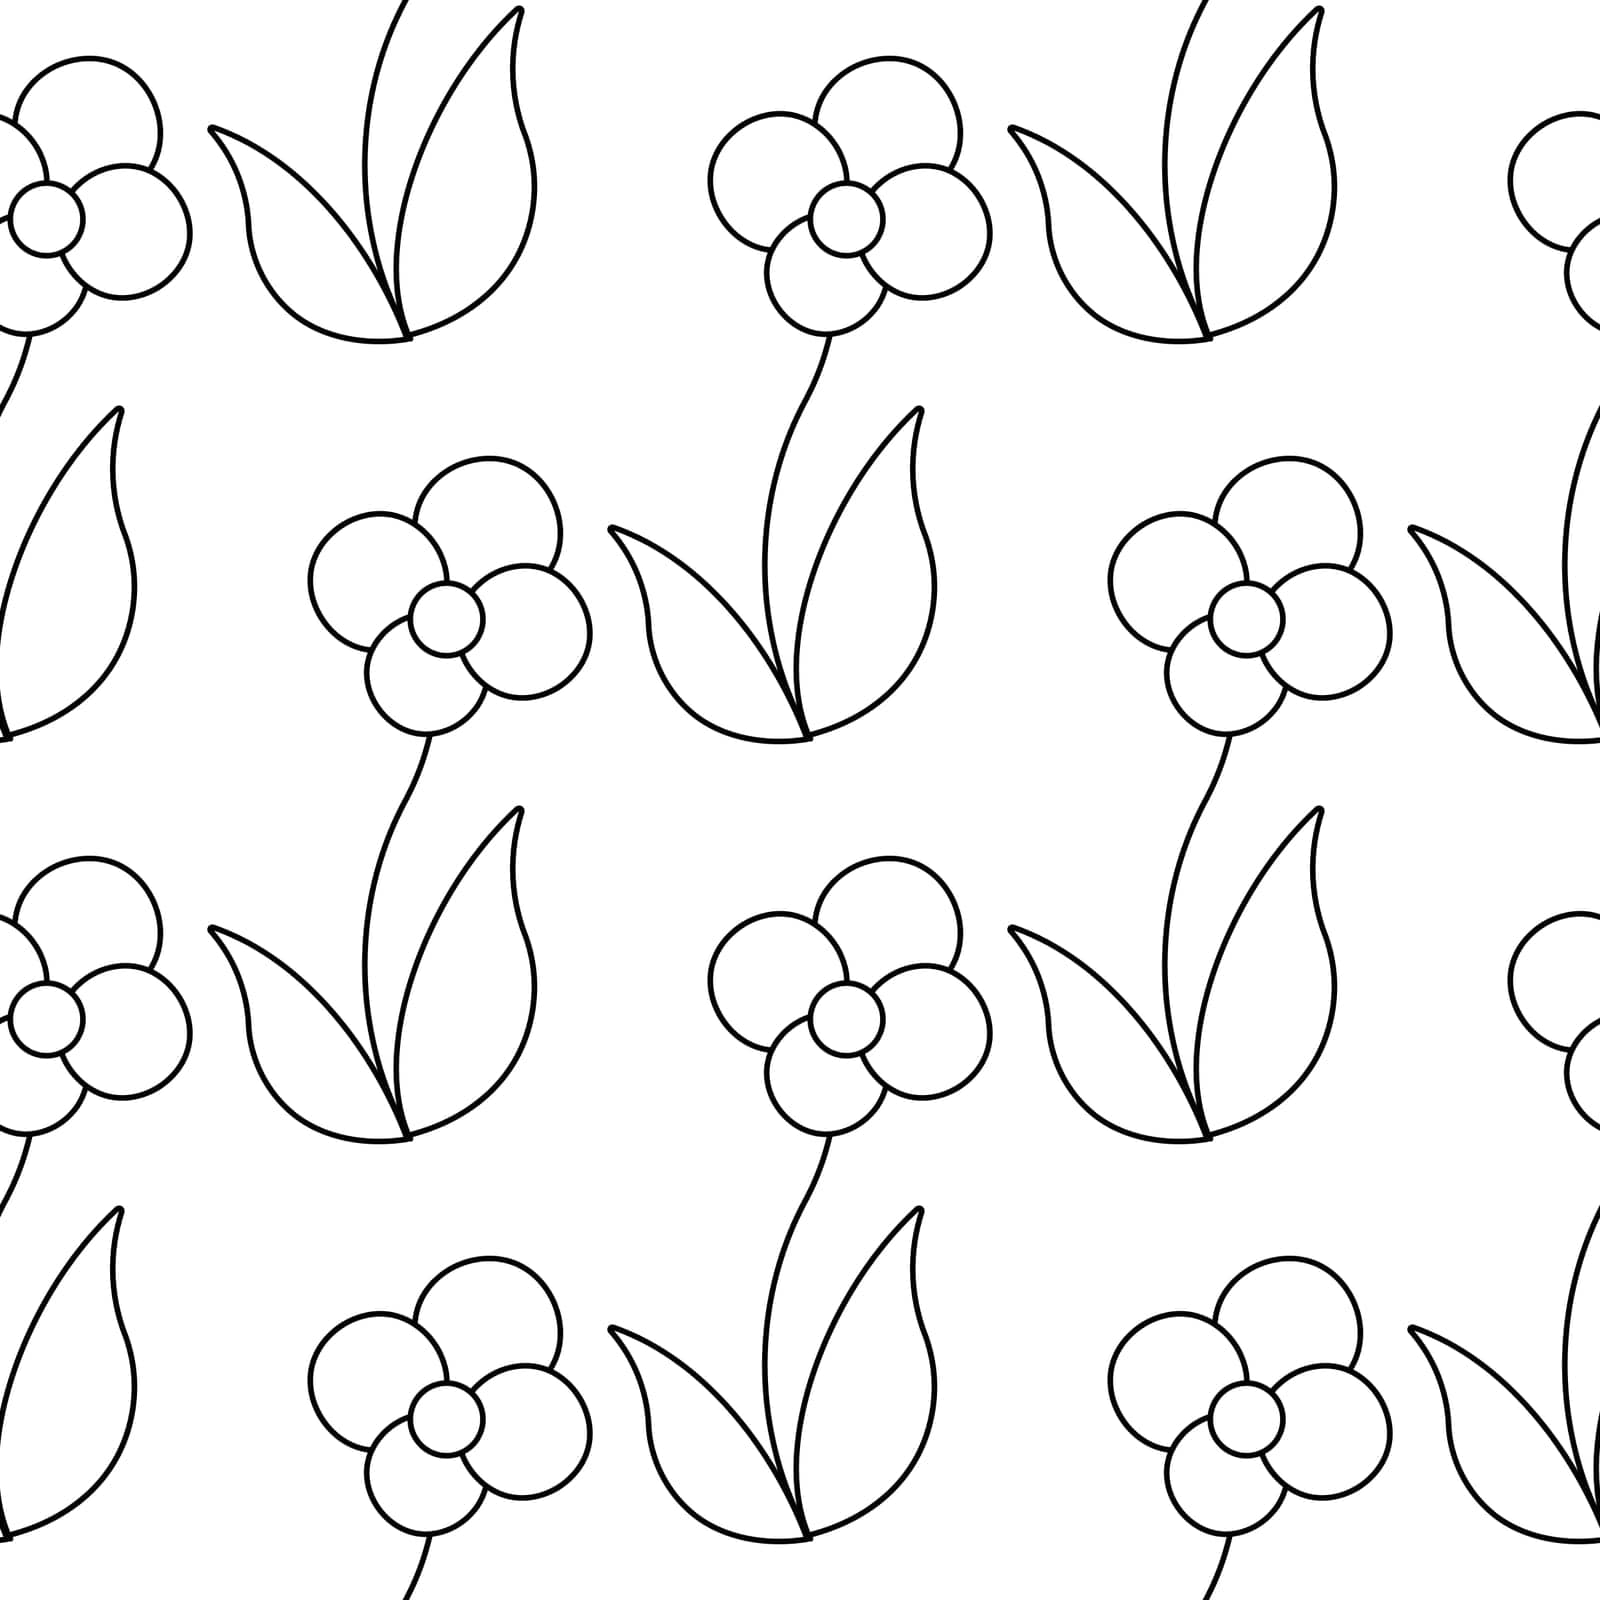 beautiful line doodle coloring flowers in the garden grow care pattern textile